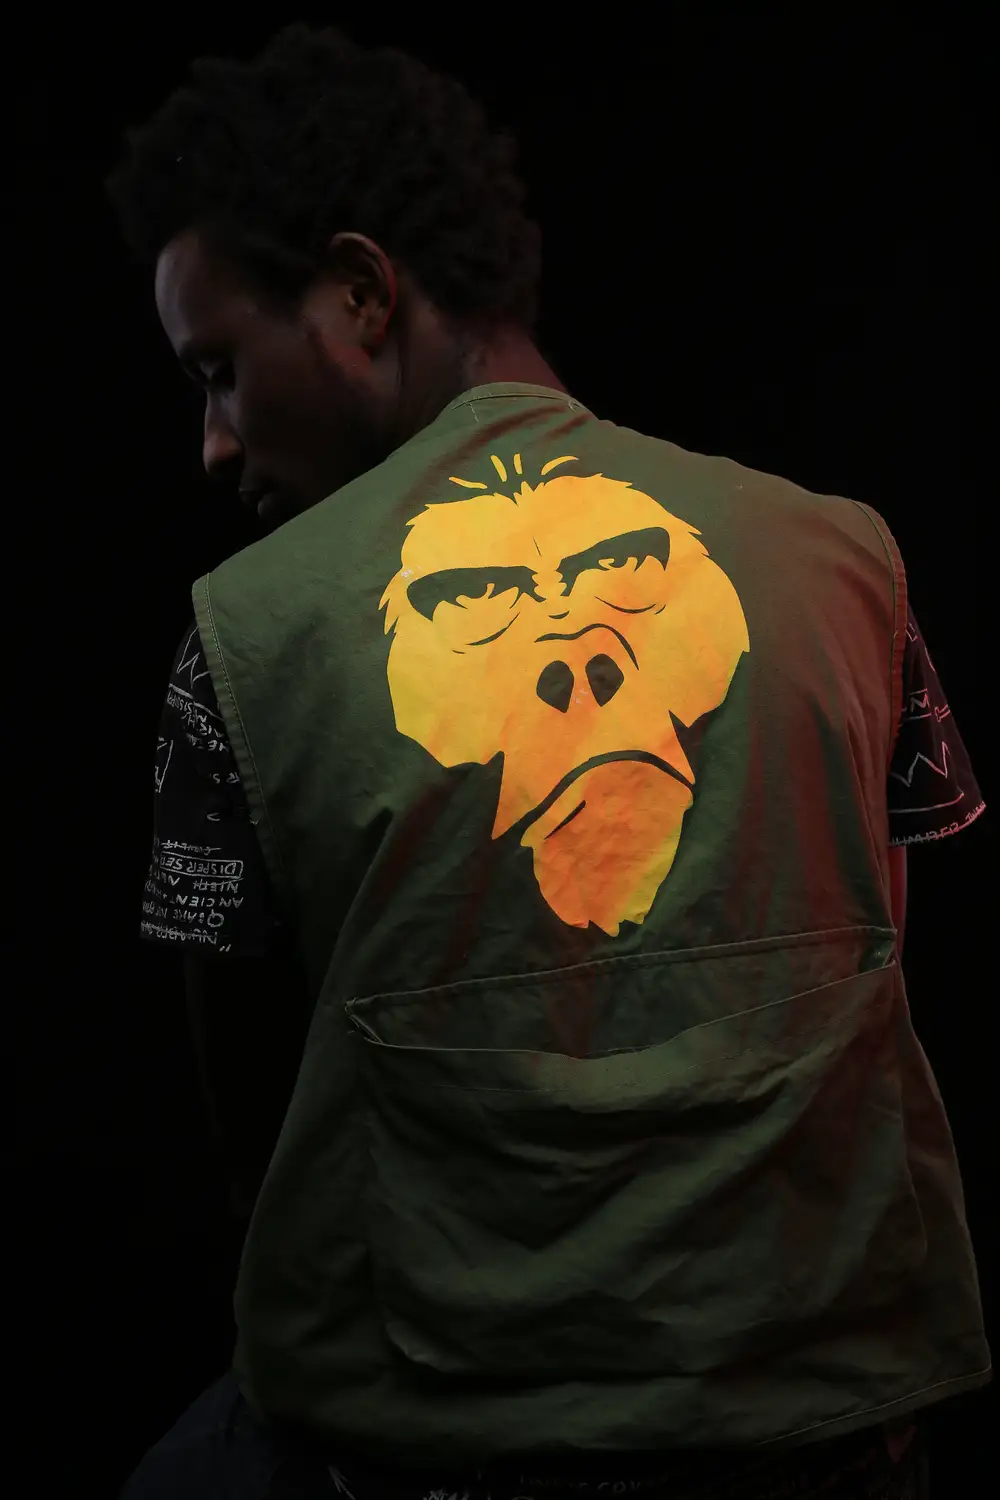 Man wearing a jacket with ape design